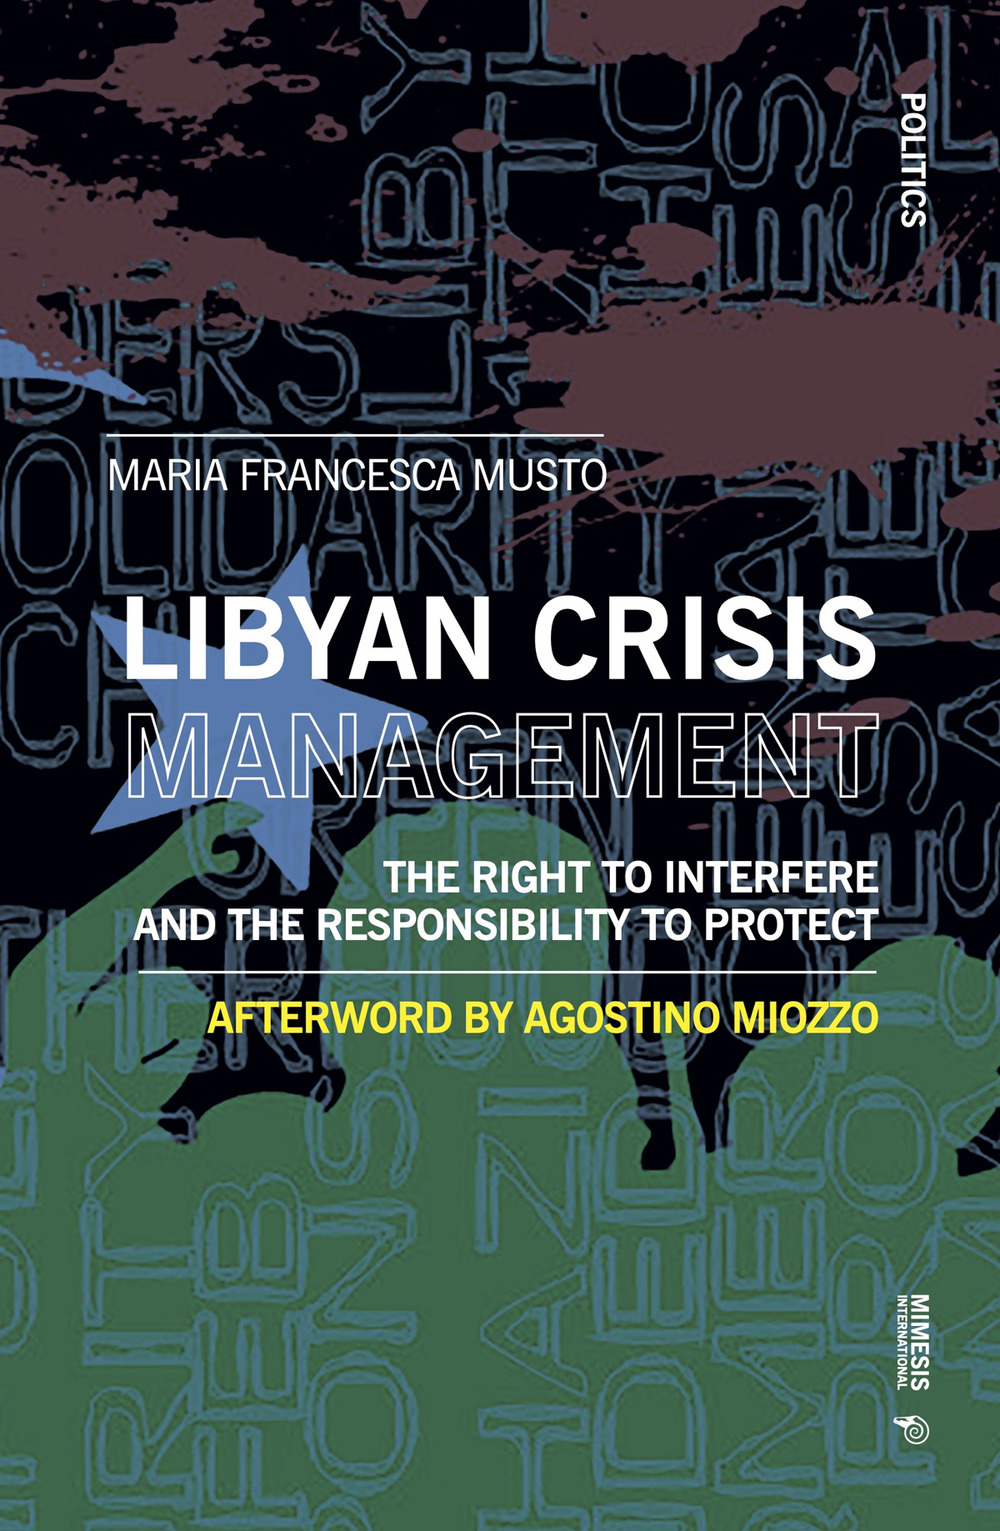 Libyan crisis management. The right to interfere and the responsability to protect